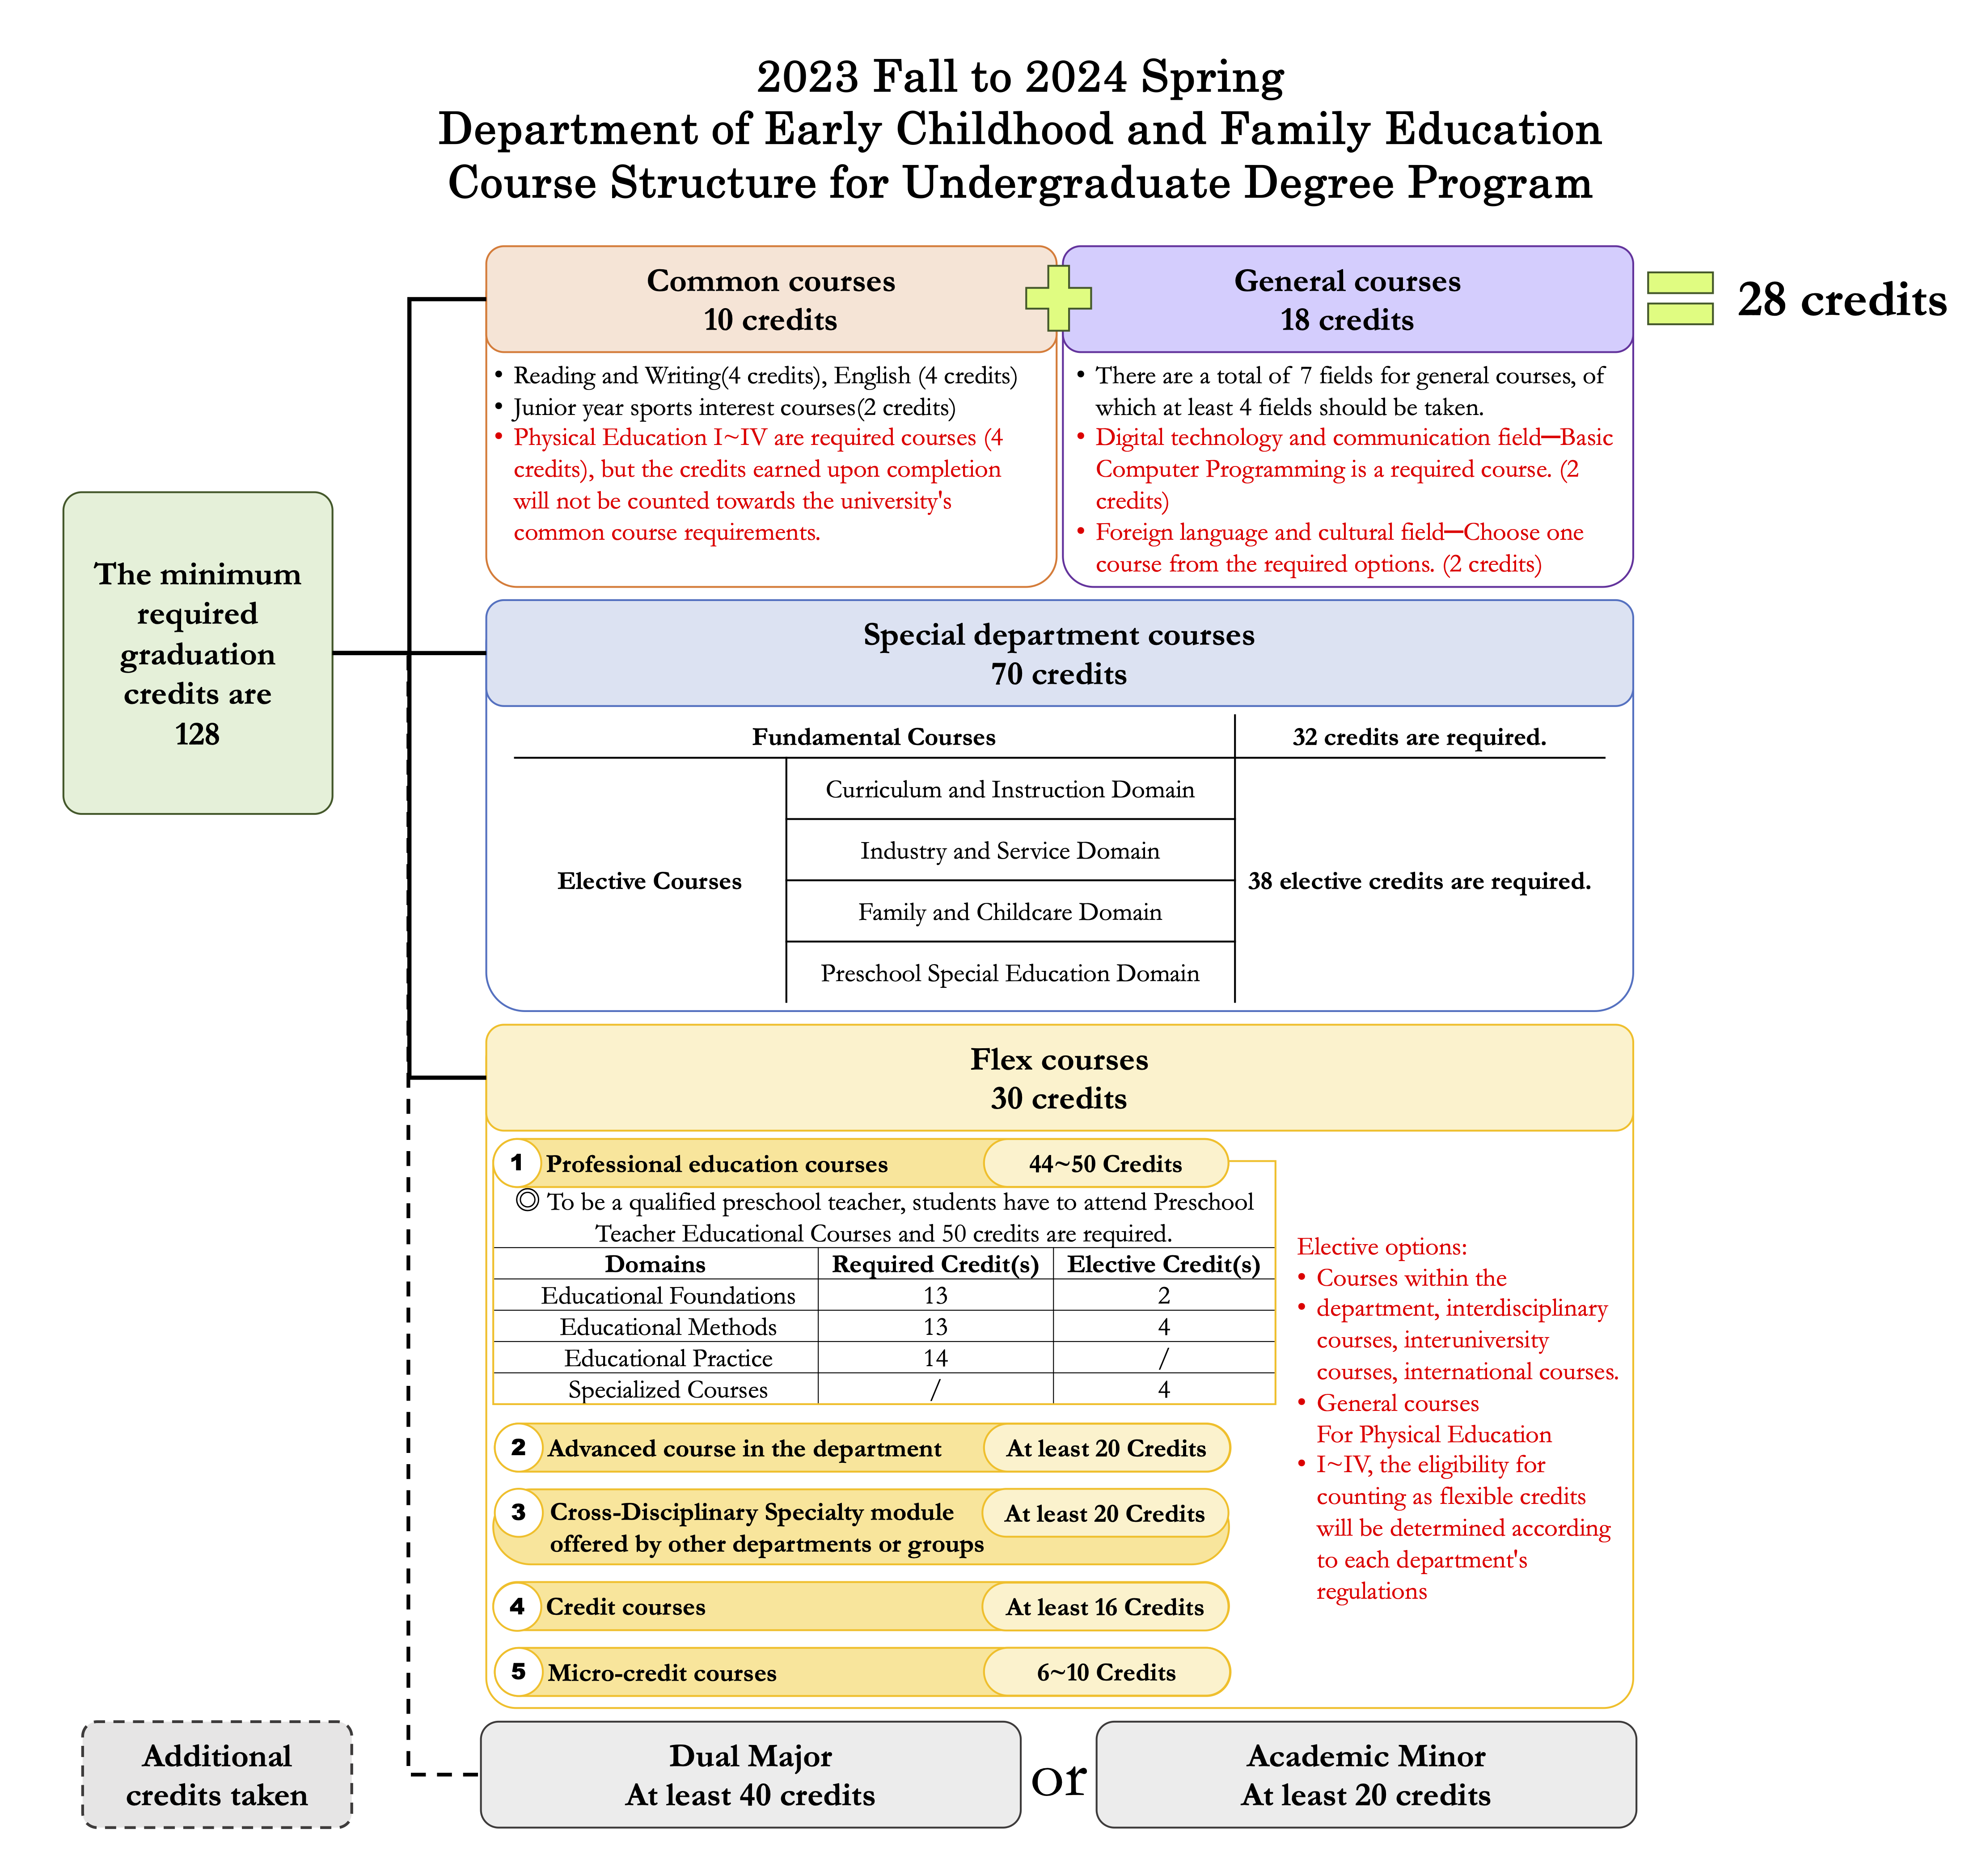 Course structure for undergraduate degree program: The image contains a flowchart outlining the course structure for an undergraduate degree program in the Department of Early Childhood and Family Education for the Fall 2023 to Spring 2024 academic year. The chart provides a detailed breakdown of various course categories and their respective credit requirements. It consists of two main sections. The first section outlines the minimum graduation requirement of 128 credits. It is further divided into three categories: 1. The first category stipulates that a minimum of 28 credits can be obtained from common courses (10 credits) and general courses (18 credits). 2. The second category encompasses our department's specialized courses, which require a minimum of 70 credits. 3. The third category includes flexible courses, such as professional education courses, advanced departmental offerings, cross-disciplinary specialty modules offered by other departments or groups, credit courses, and micro-credit courses. A minimum of 30 credits is required within this category. Additionally, the second section of the chart features additional courses, including a Dual Major and an Academic Minor, each requiring a minimum of 40 and 20 credits, respectively.